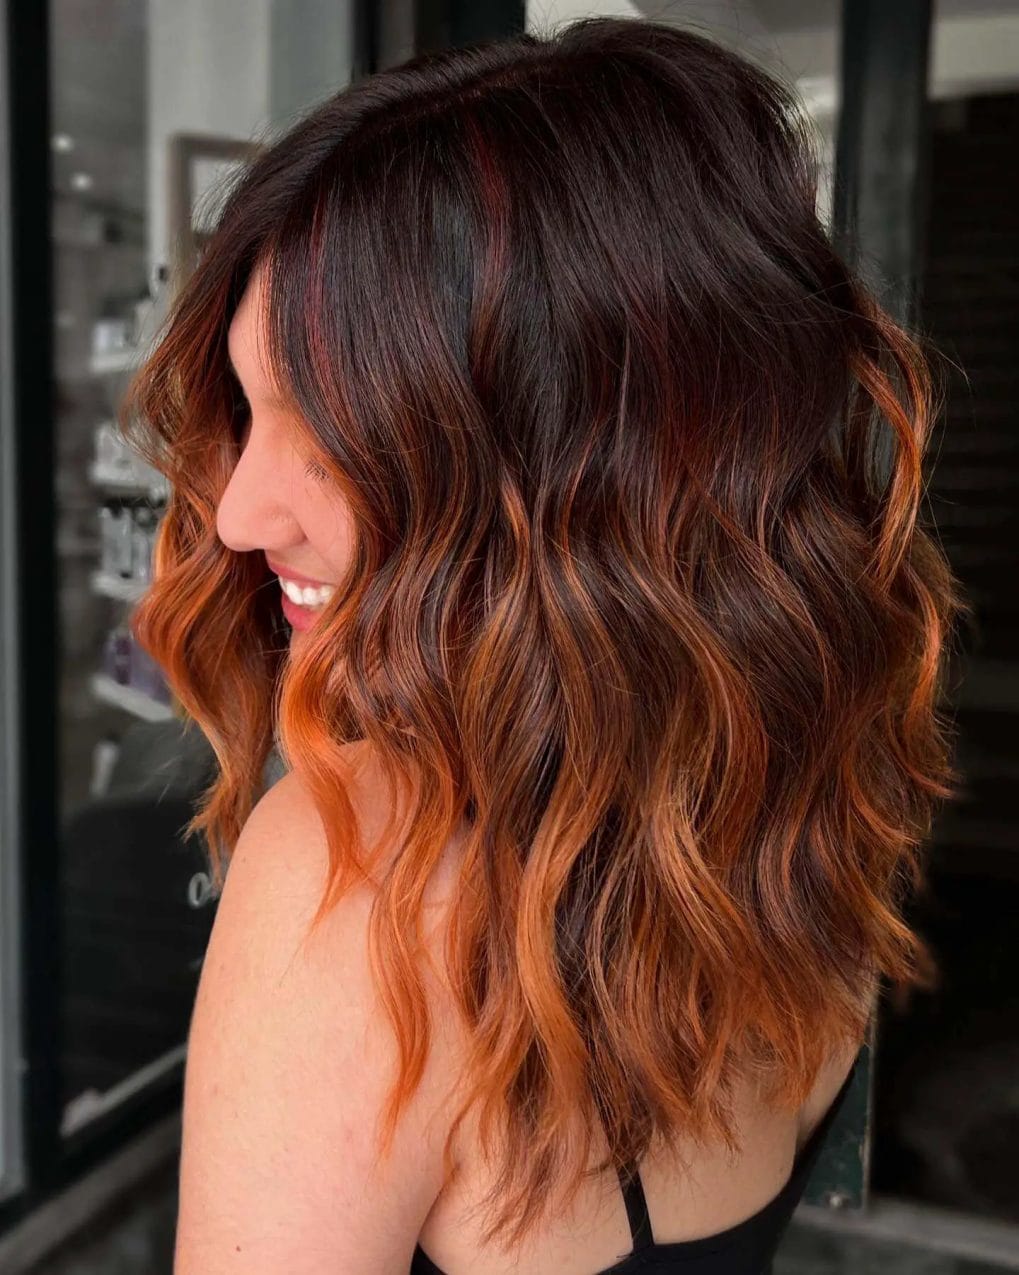 Modern lob in copper and caramel gradient with playful waves.